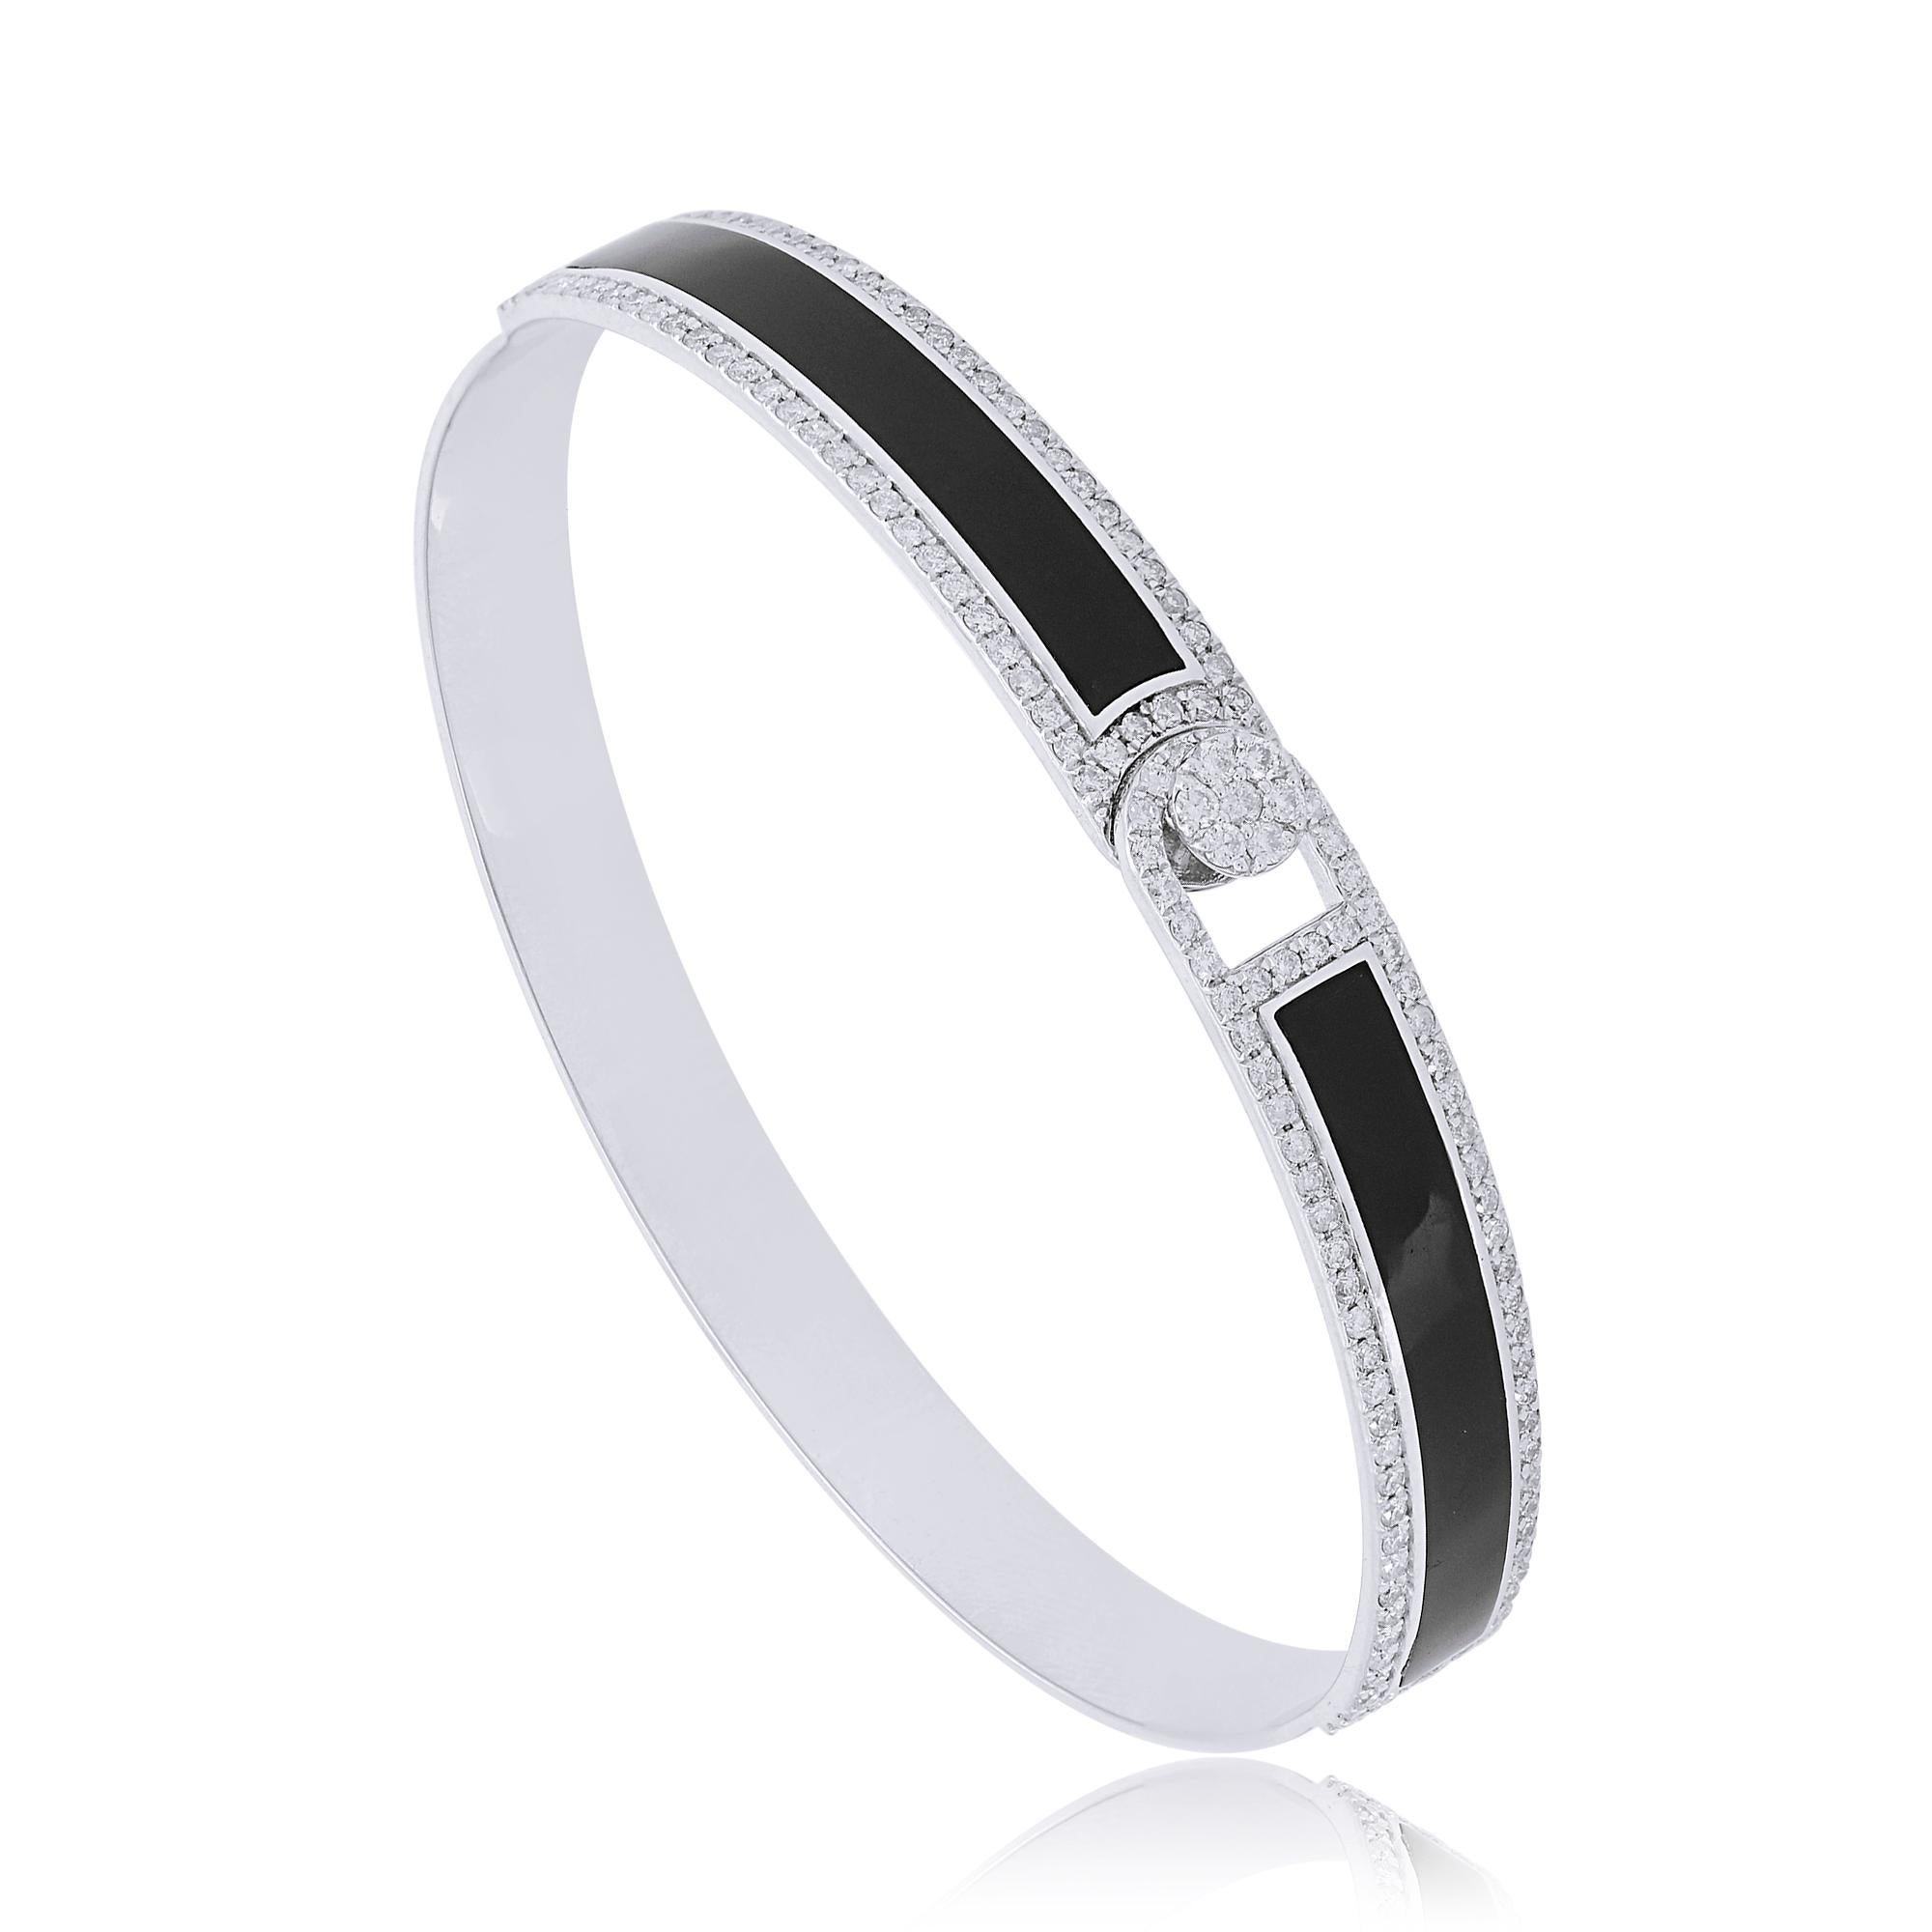 The bangle itself is meticulously crafted from high-quality 14k white gold, renowned for its durability and radiant shine. The smooth, polished surface of the gold complements the bold contrast of the black enamel and the brilliance of the diamond,